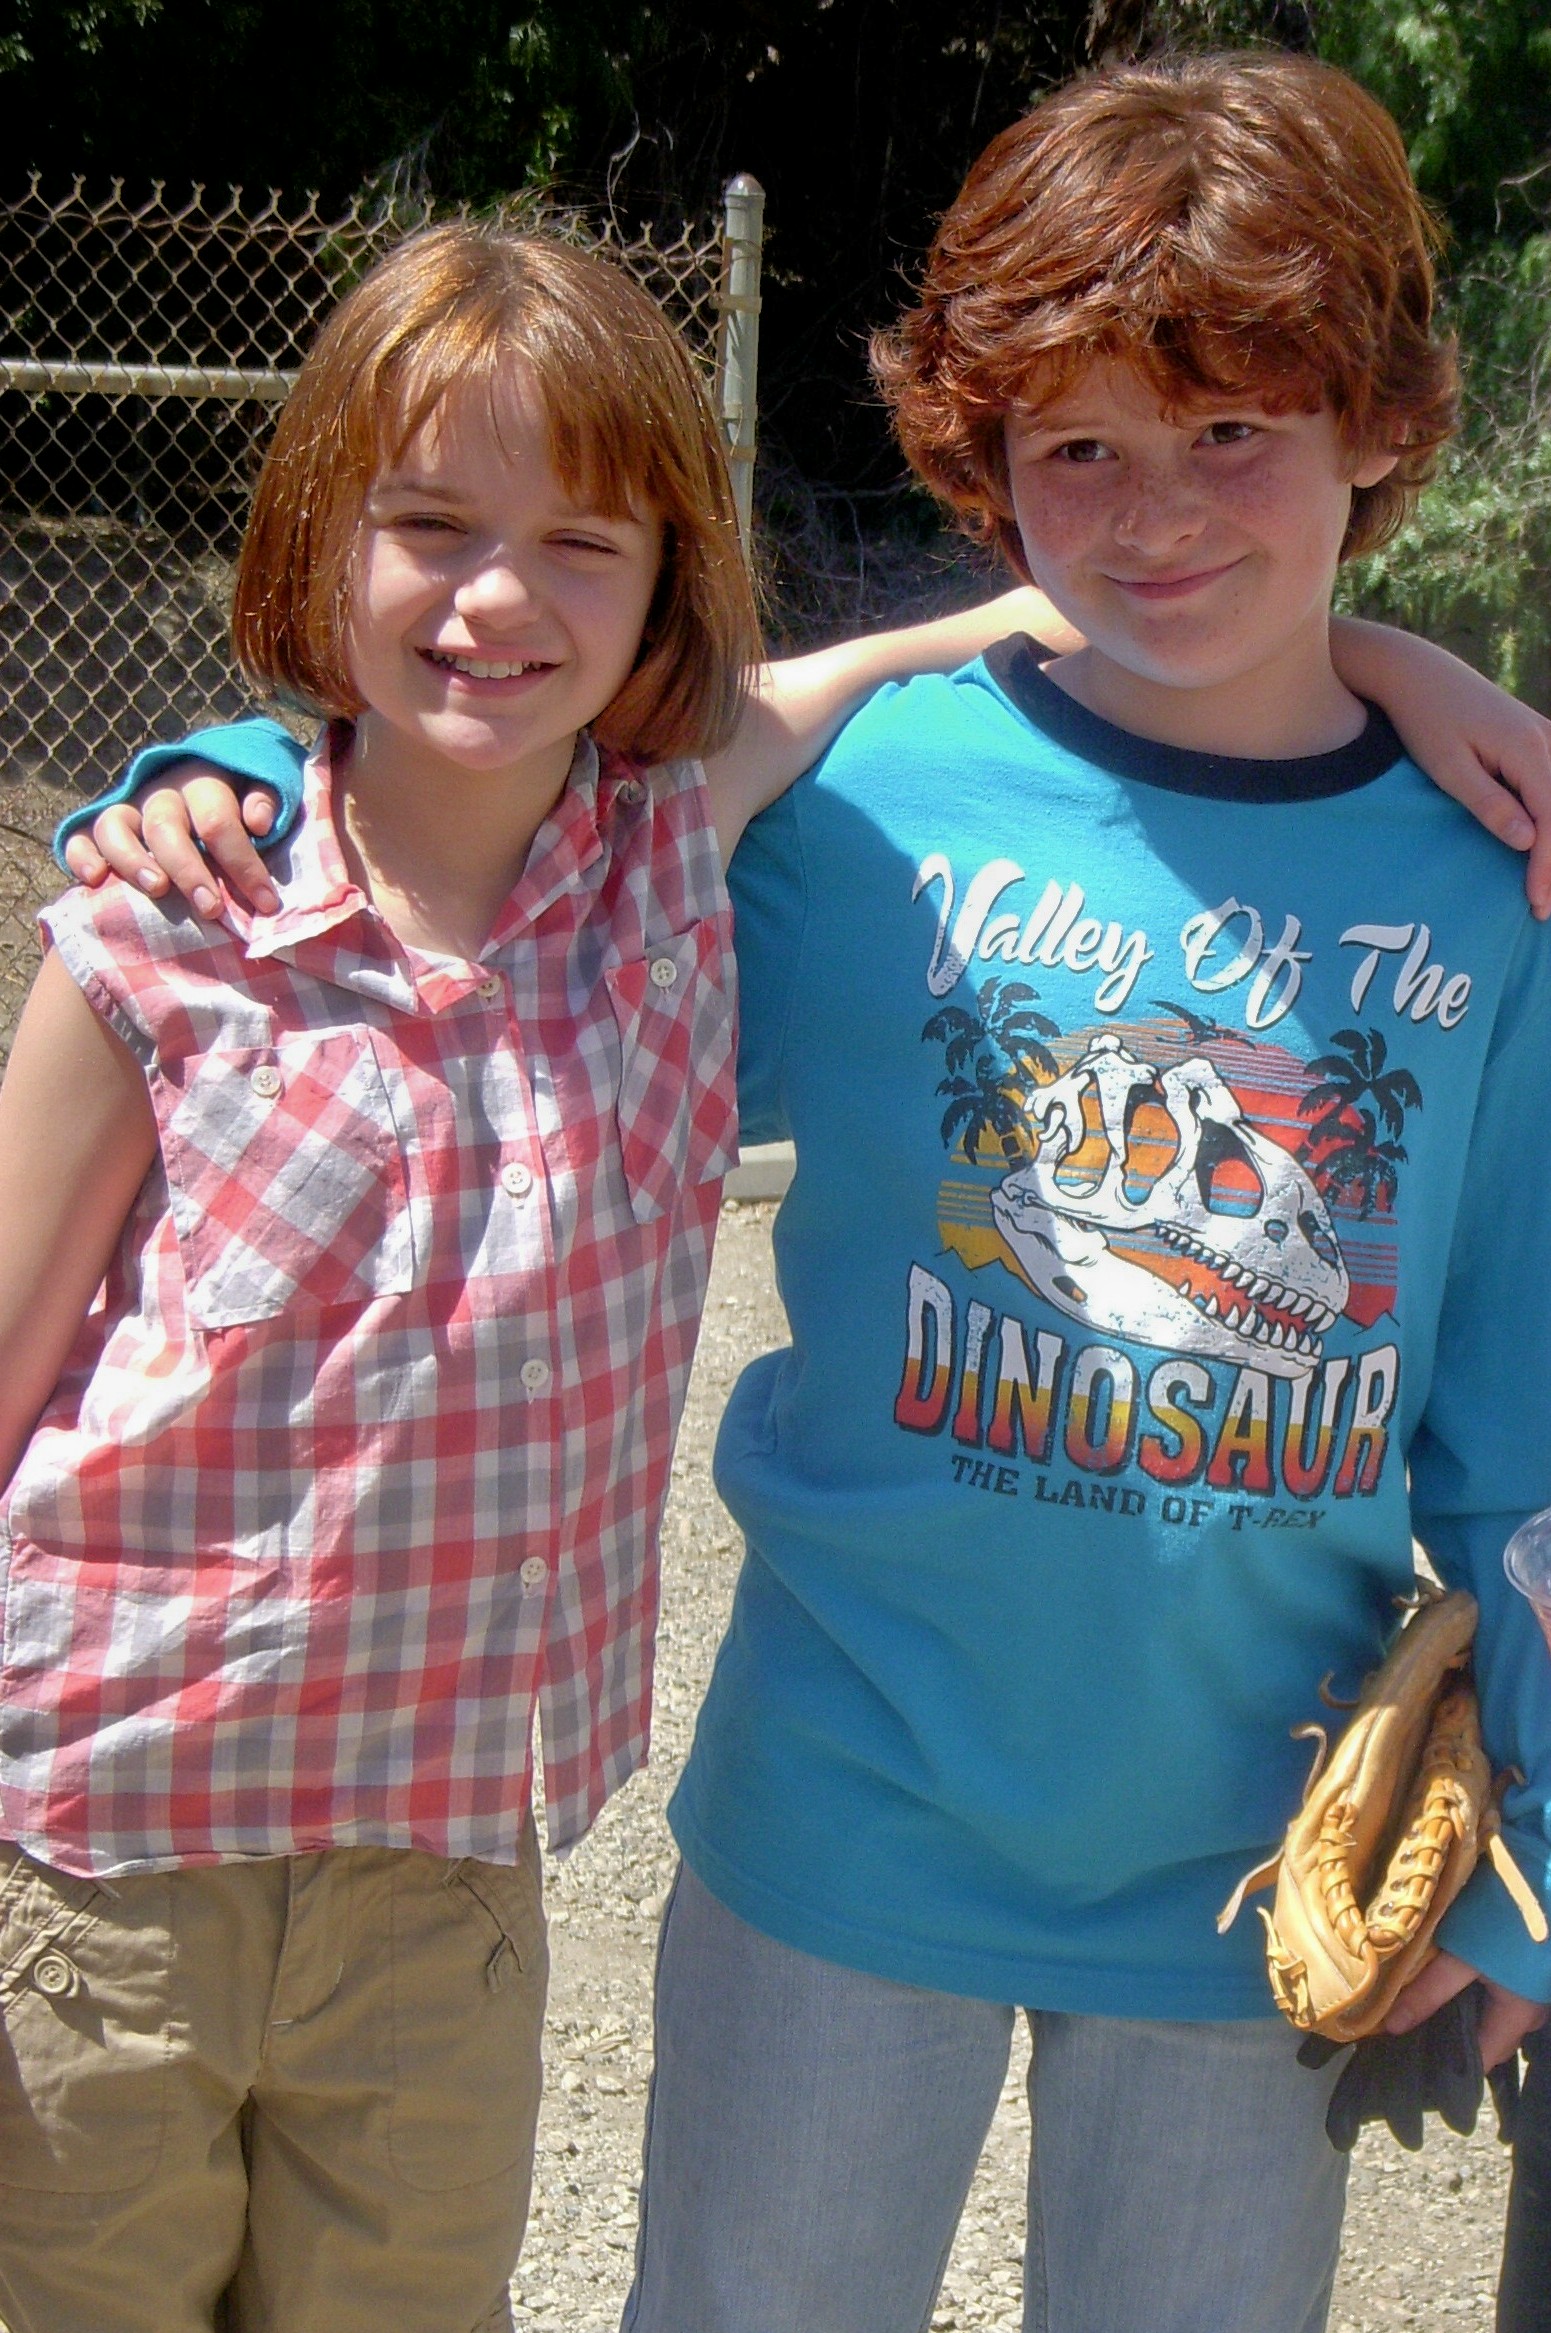 Dmitri and Joey King